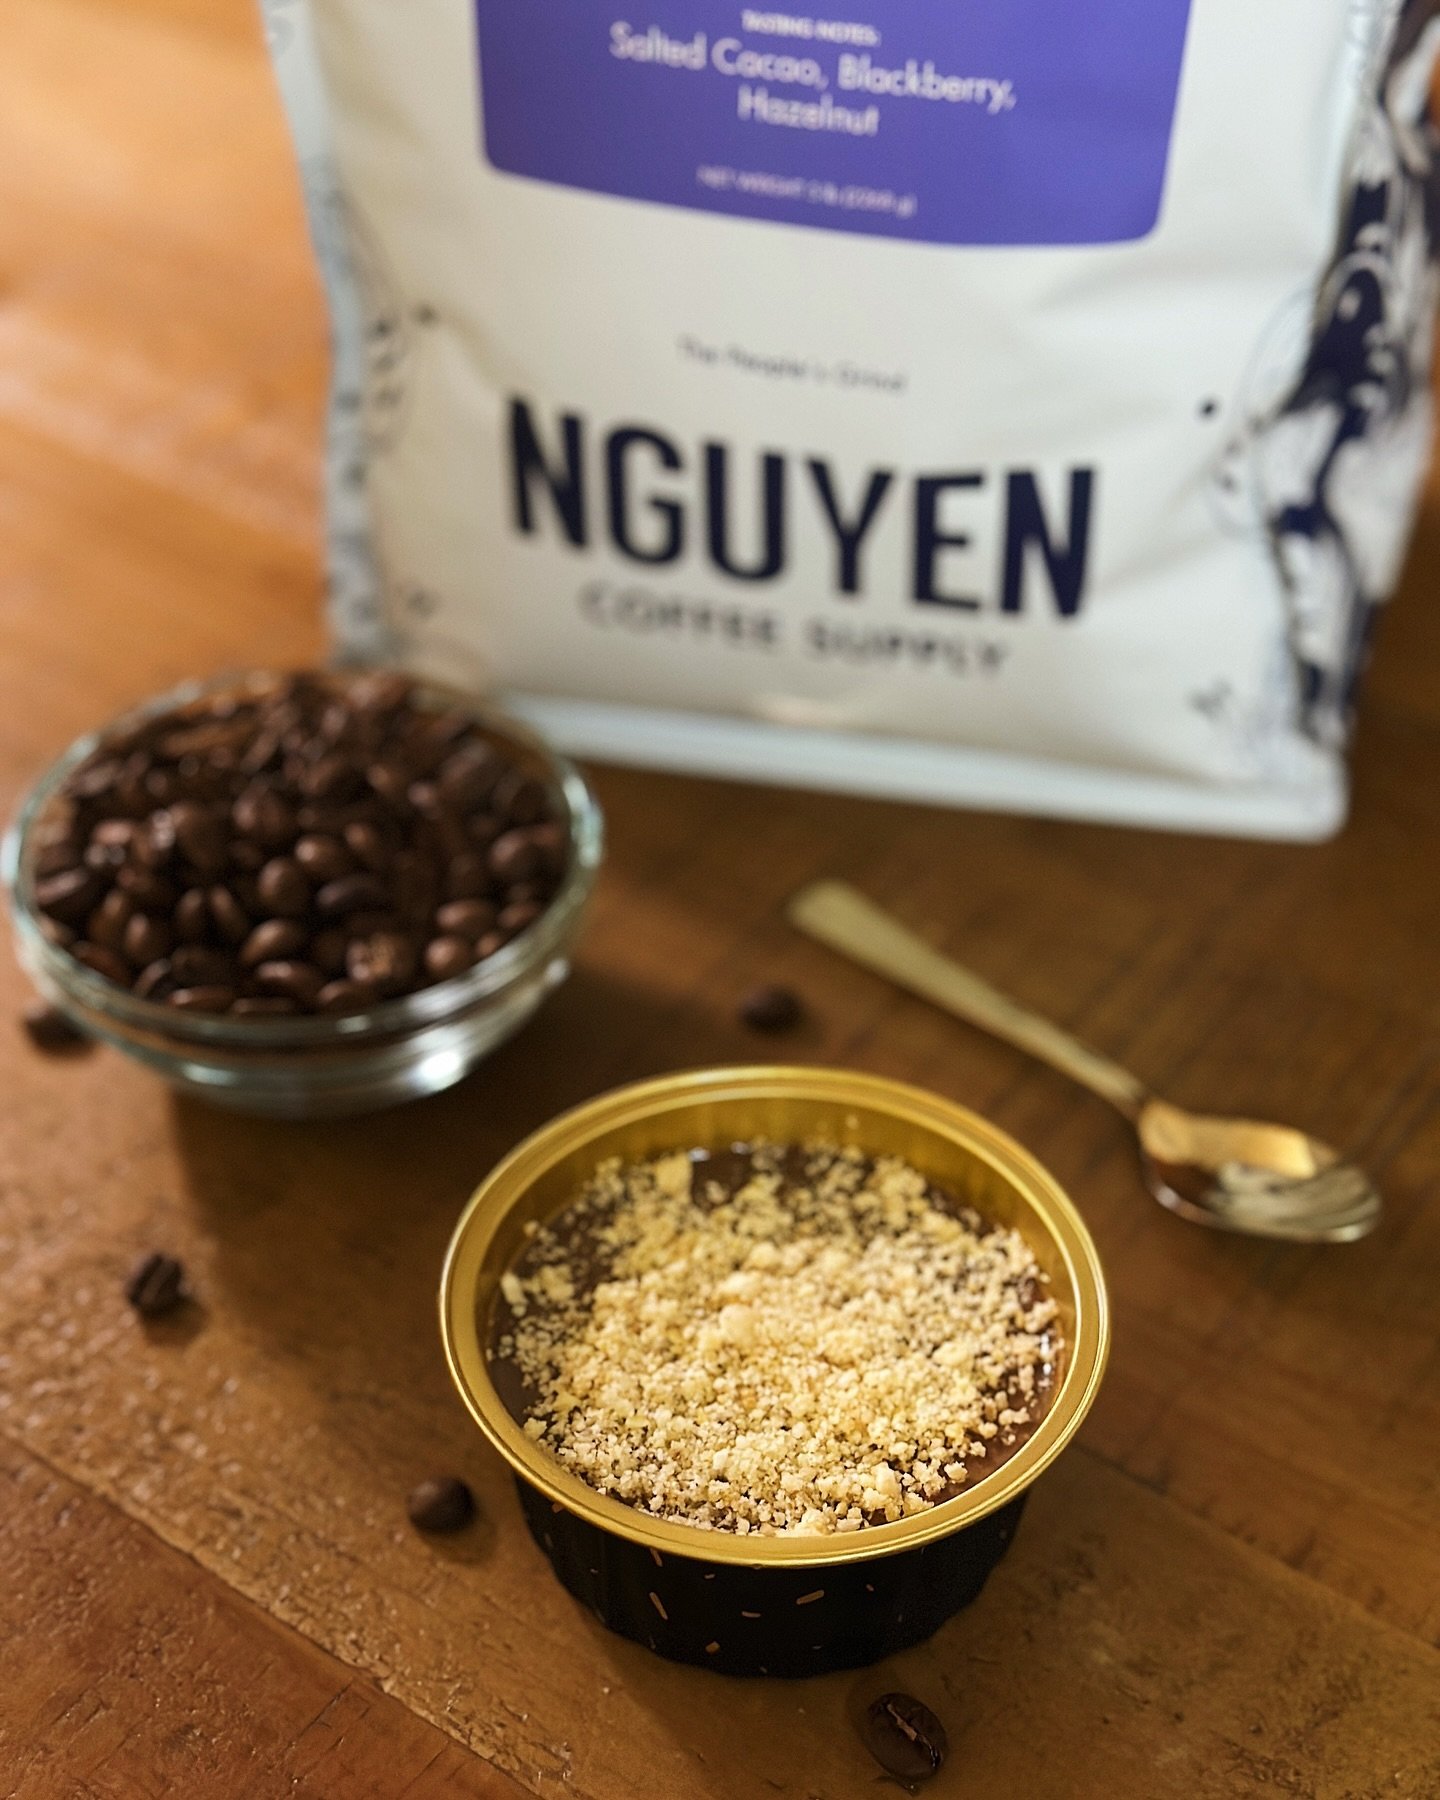 Treat yourself to a little pick-me-up with our Cafe Sữa Đ&aacute; Custard with a banana sugar dust topping. Made with the dark-roasted Saigon coffee beans by @nguyencoffeesupply for that powerful, bold flavor ☕️